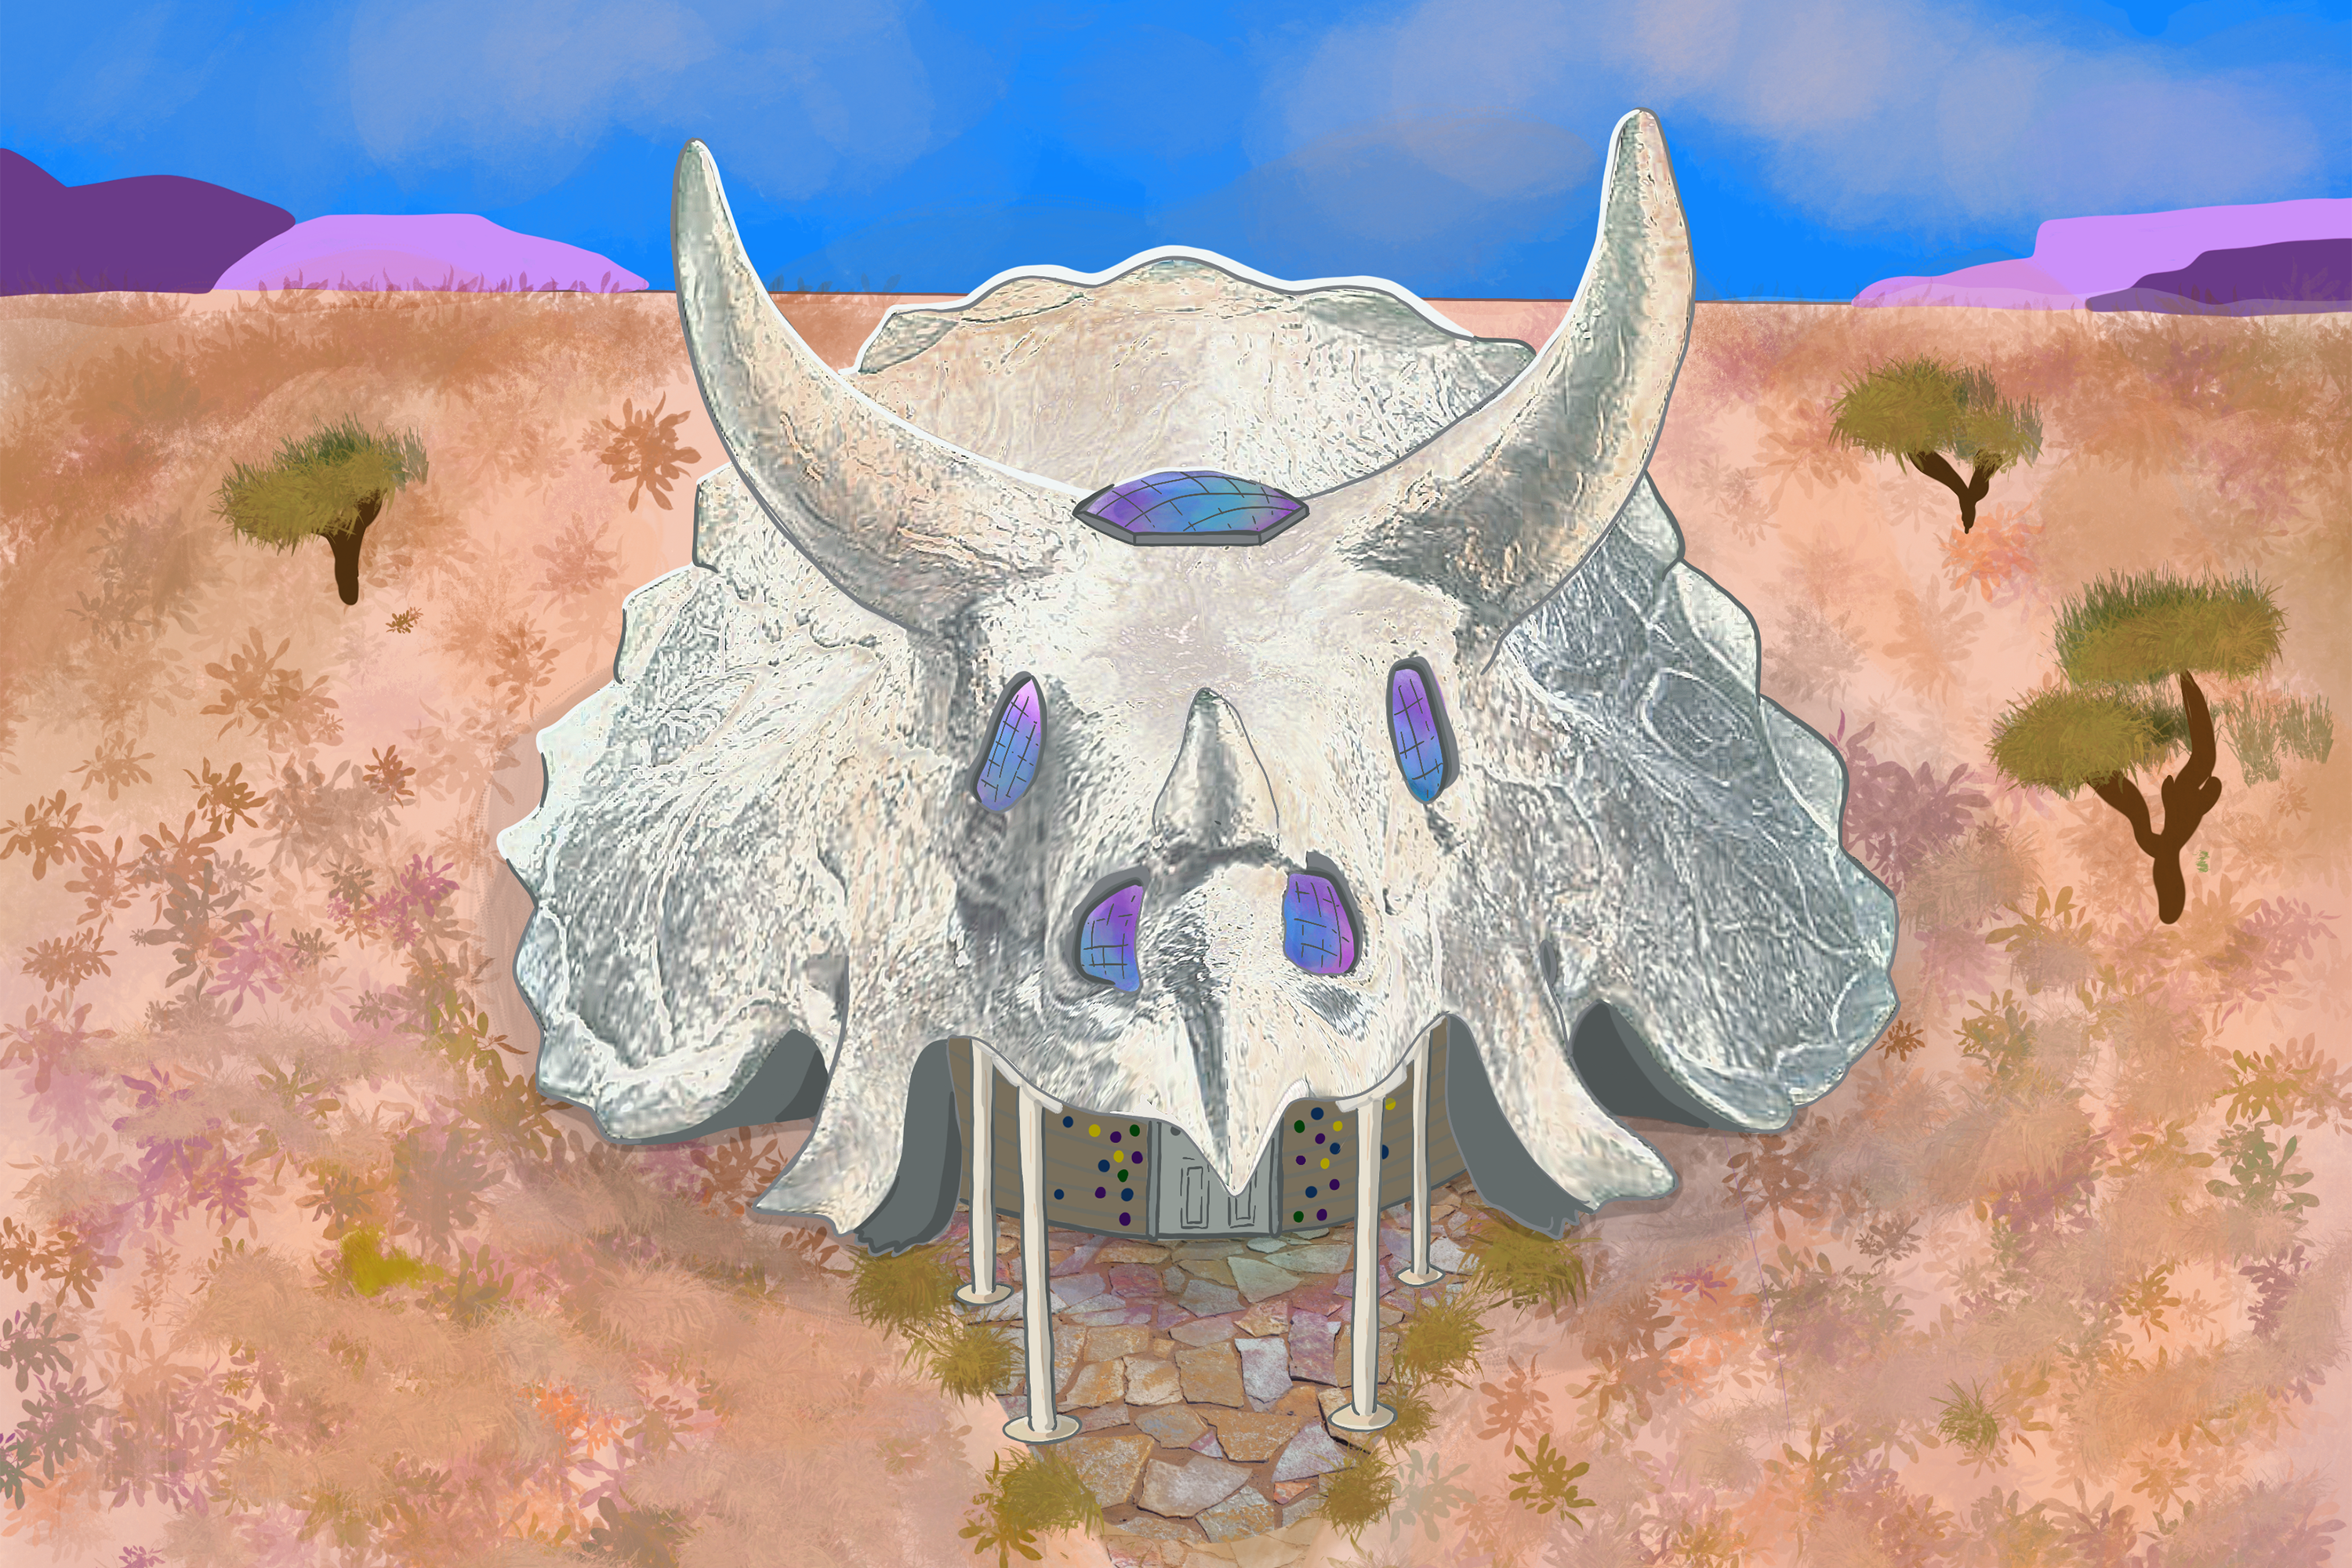 Adobe Fossilized Dinosaur Skull in Desert created by Haylee M. for Airbnb OMG! Fund